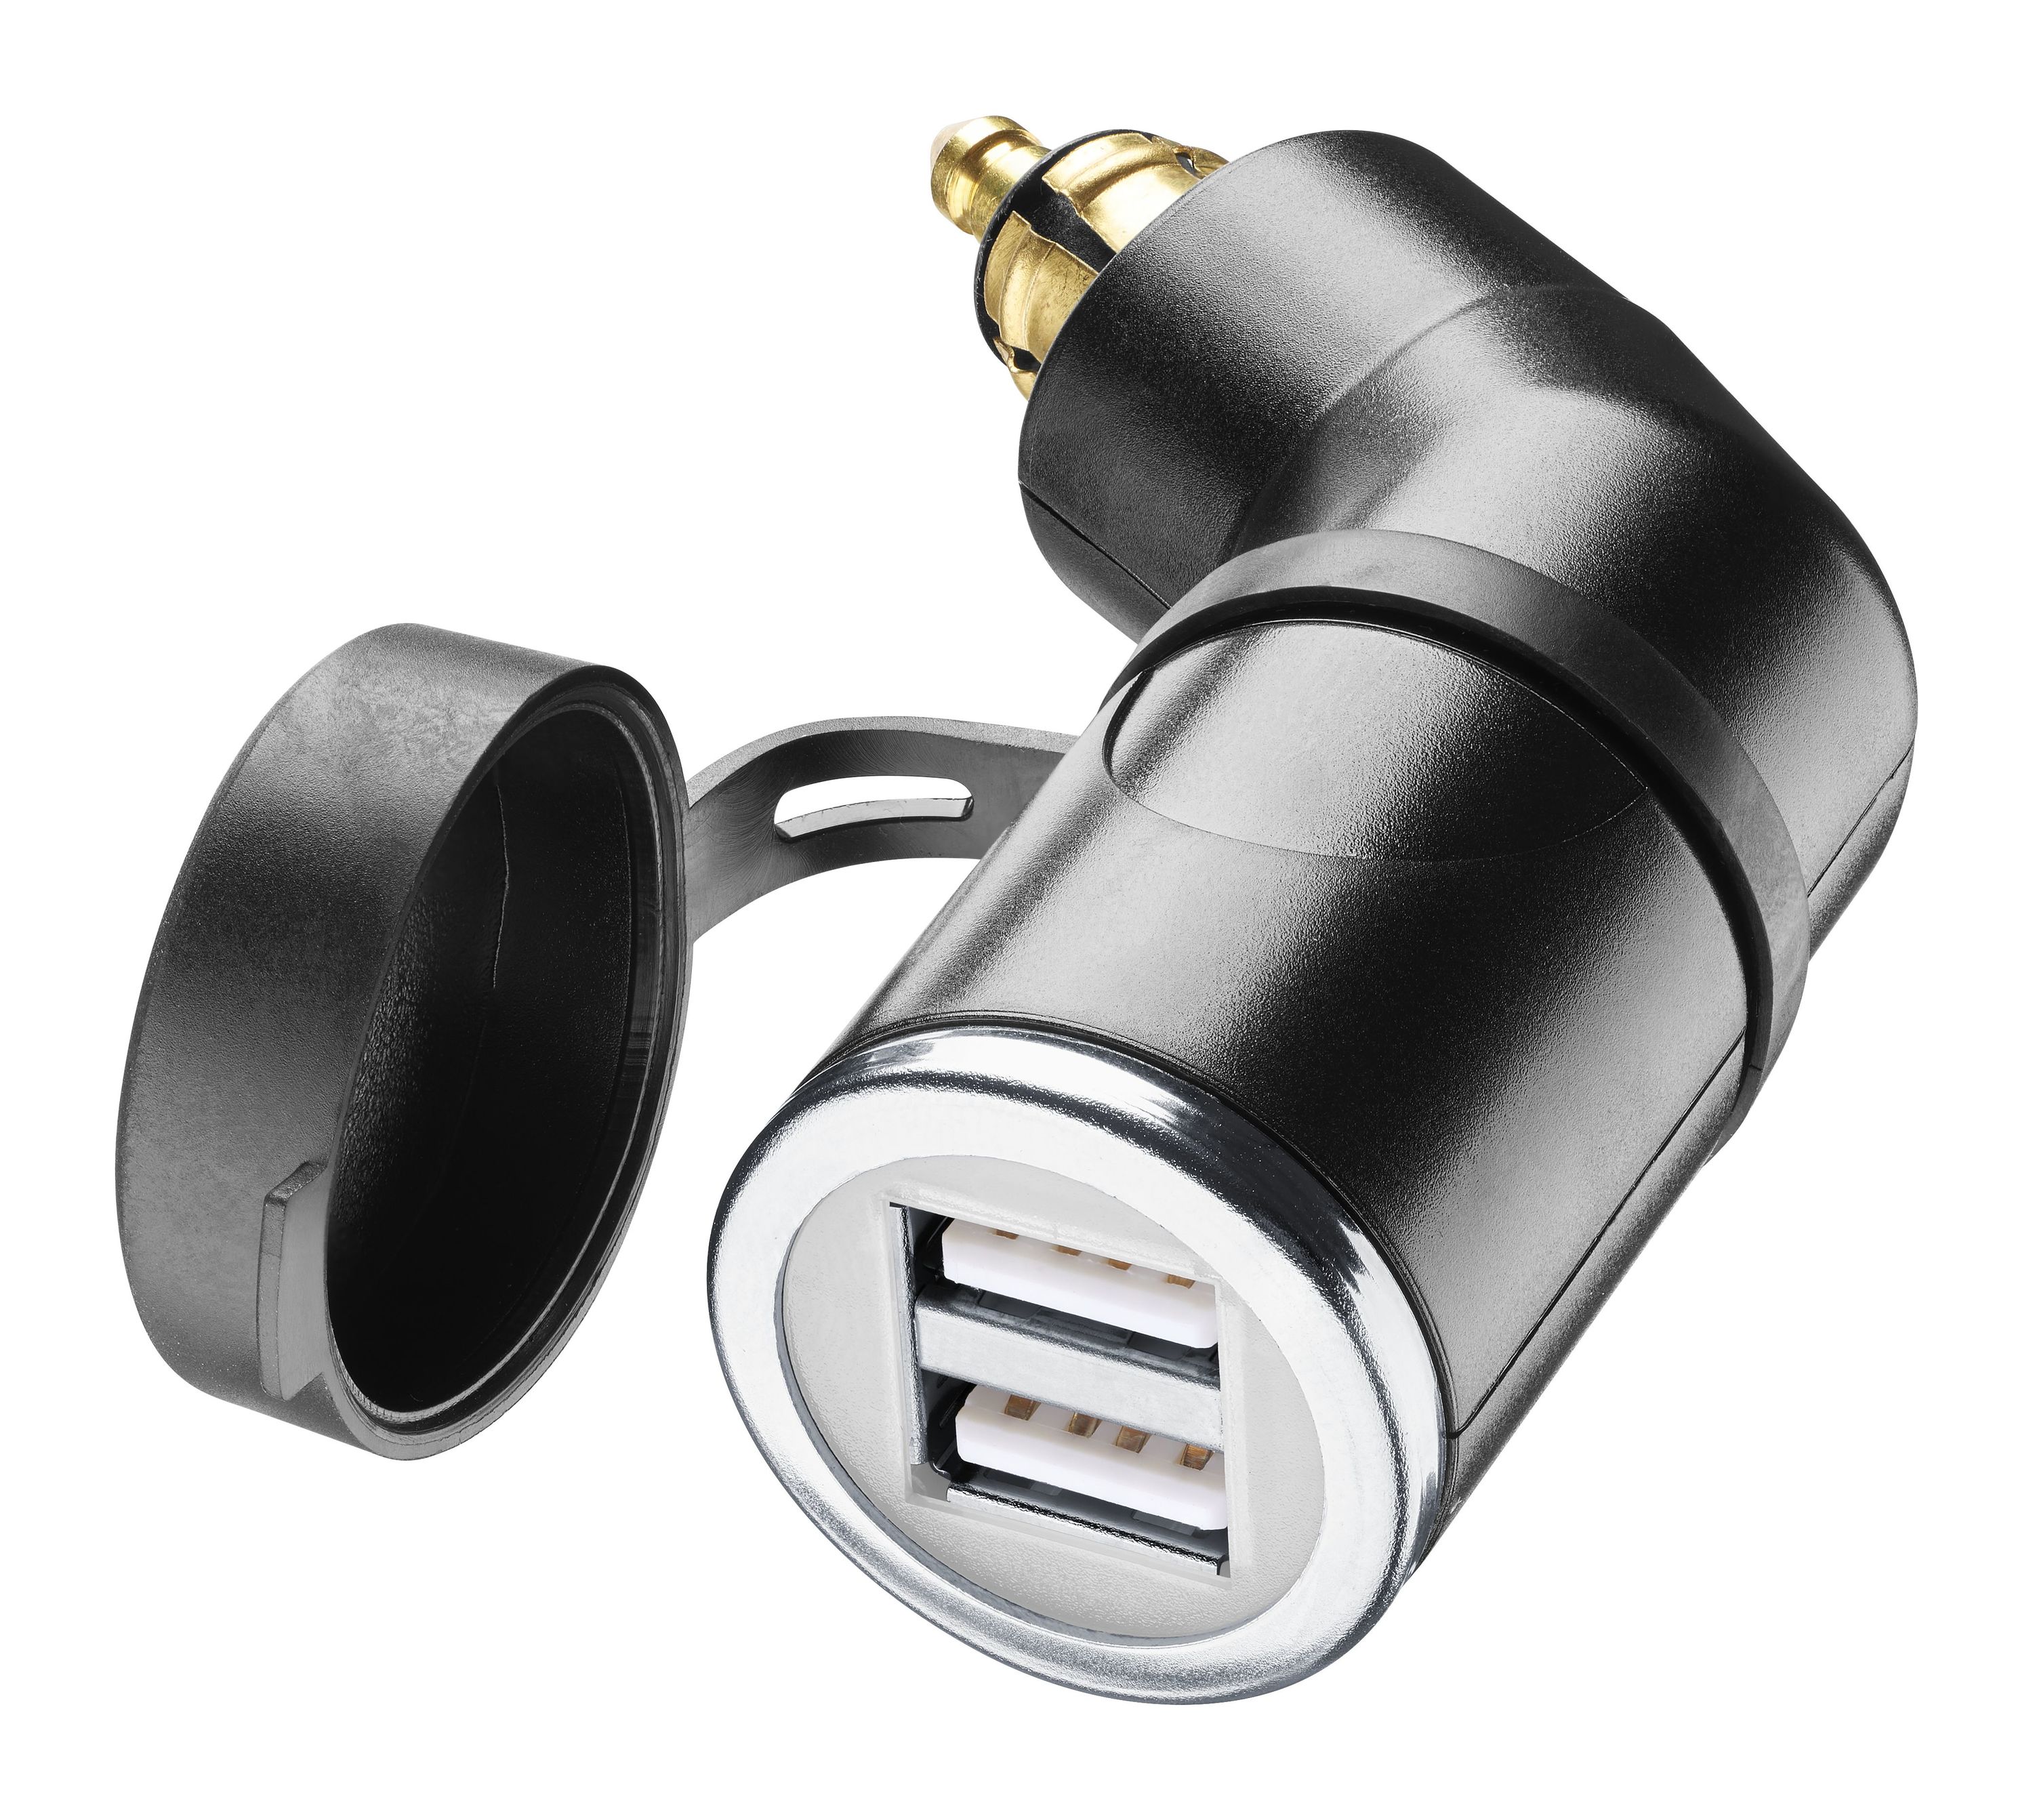 DIN-DOUBLE USB ADAPTER, Charge and utility